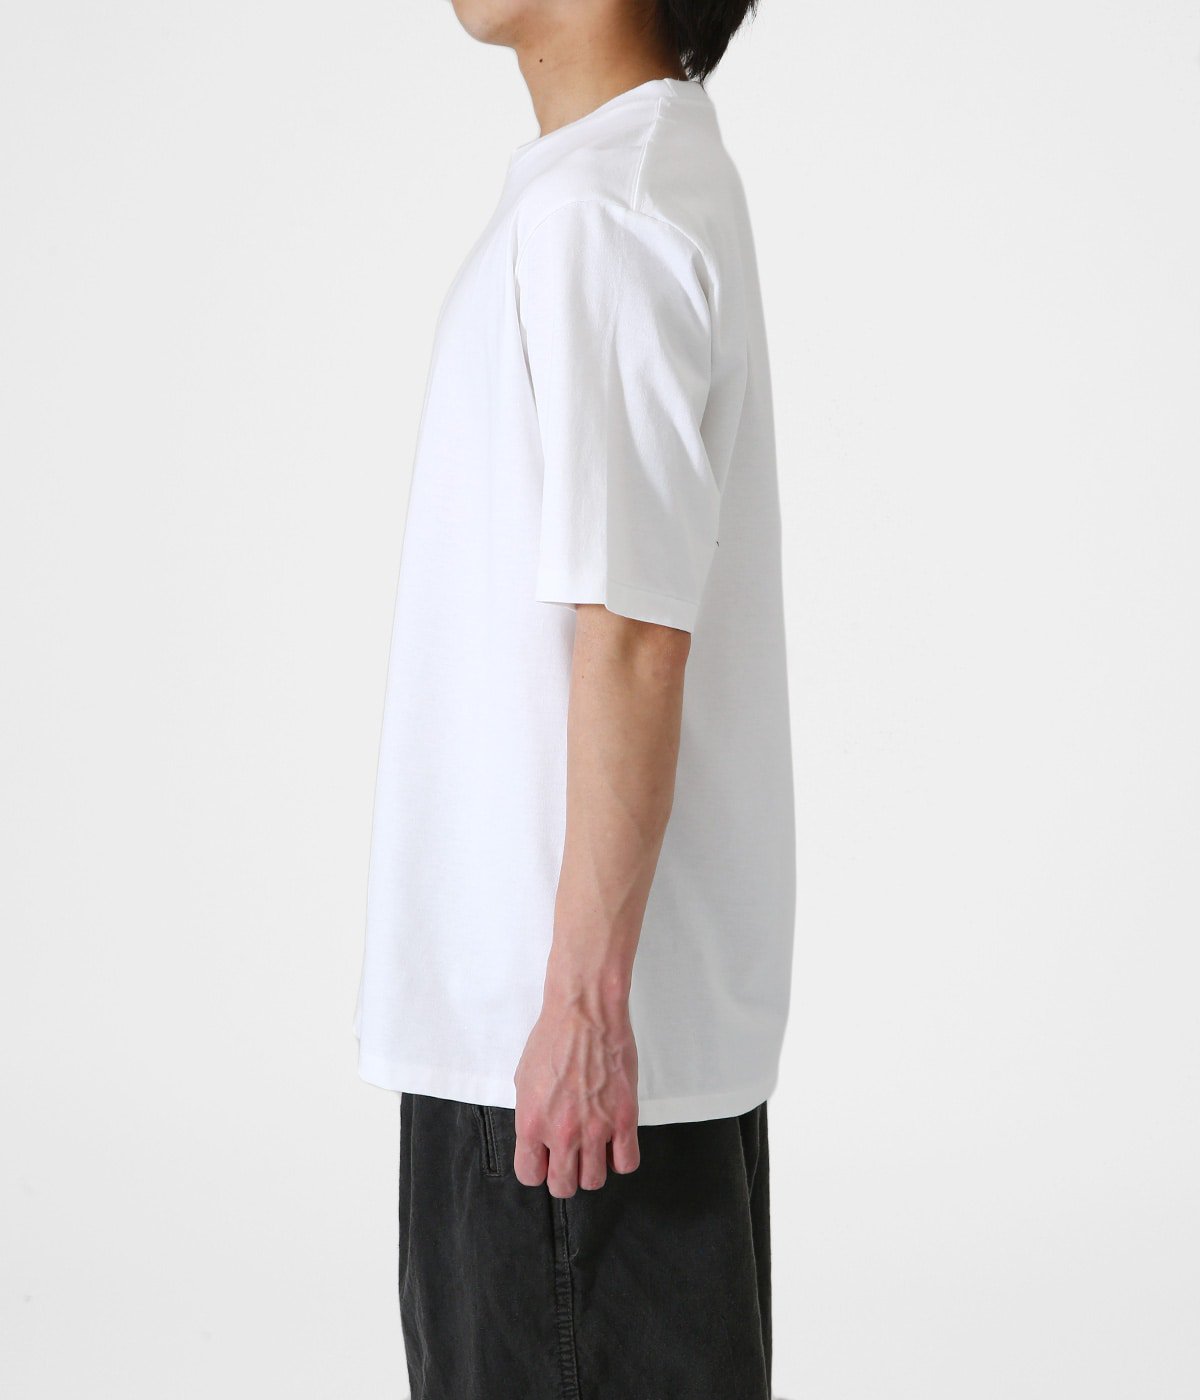 PACK T-SHIRT(DEGREASE COTTON)